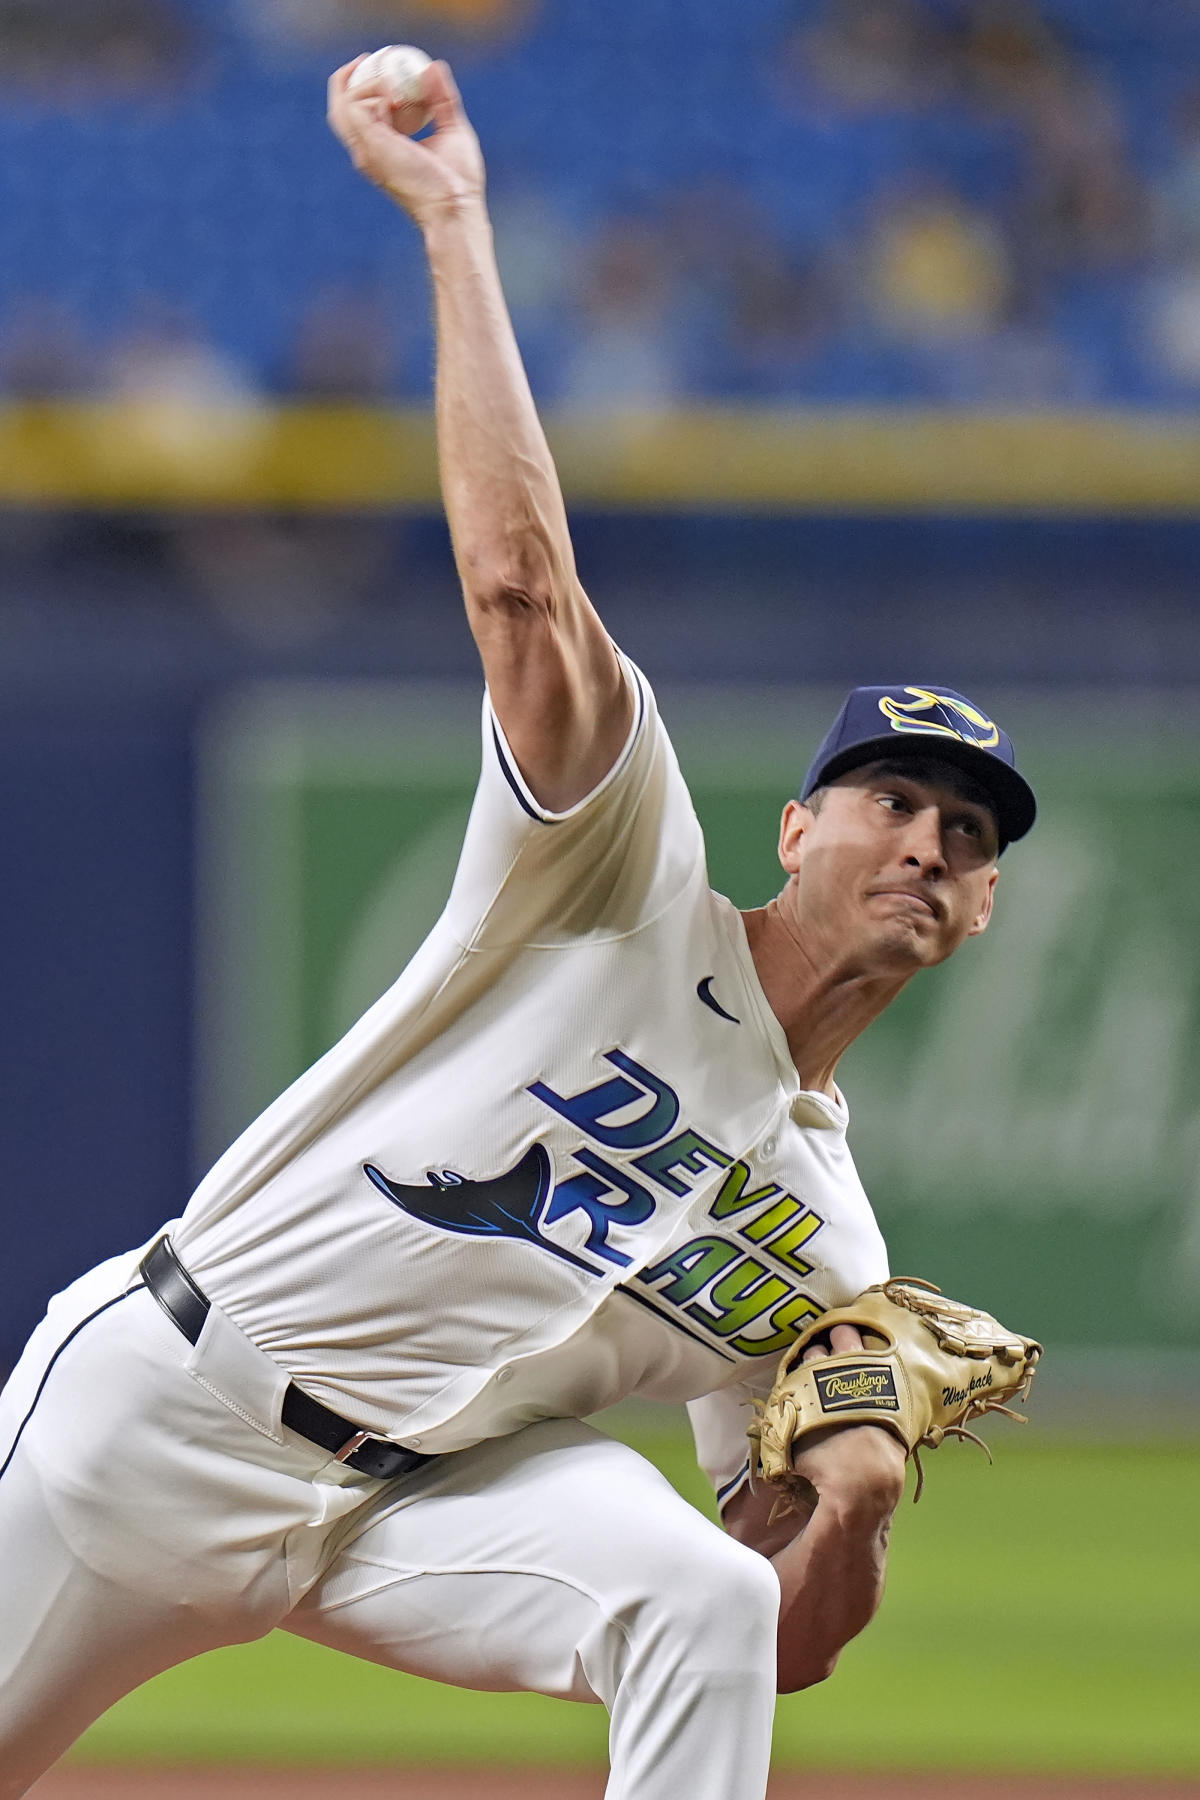 Waguespack and 5 relievers combine on a 6-hitter and Rays beat Giants 2-1